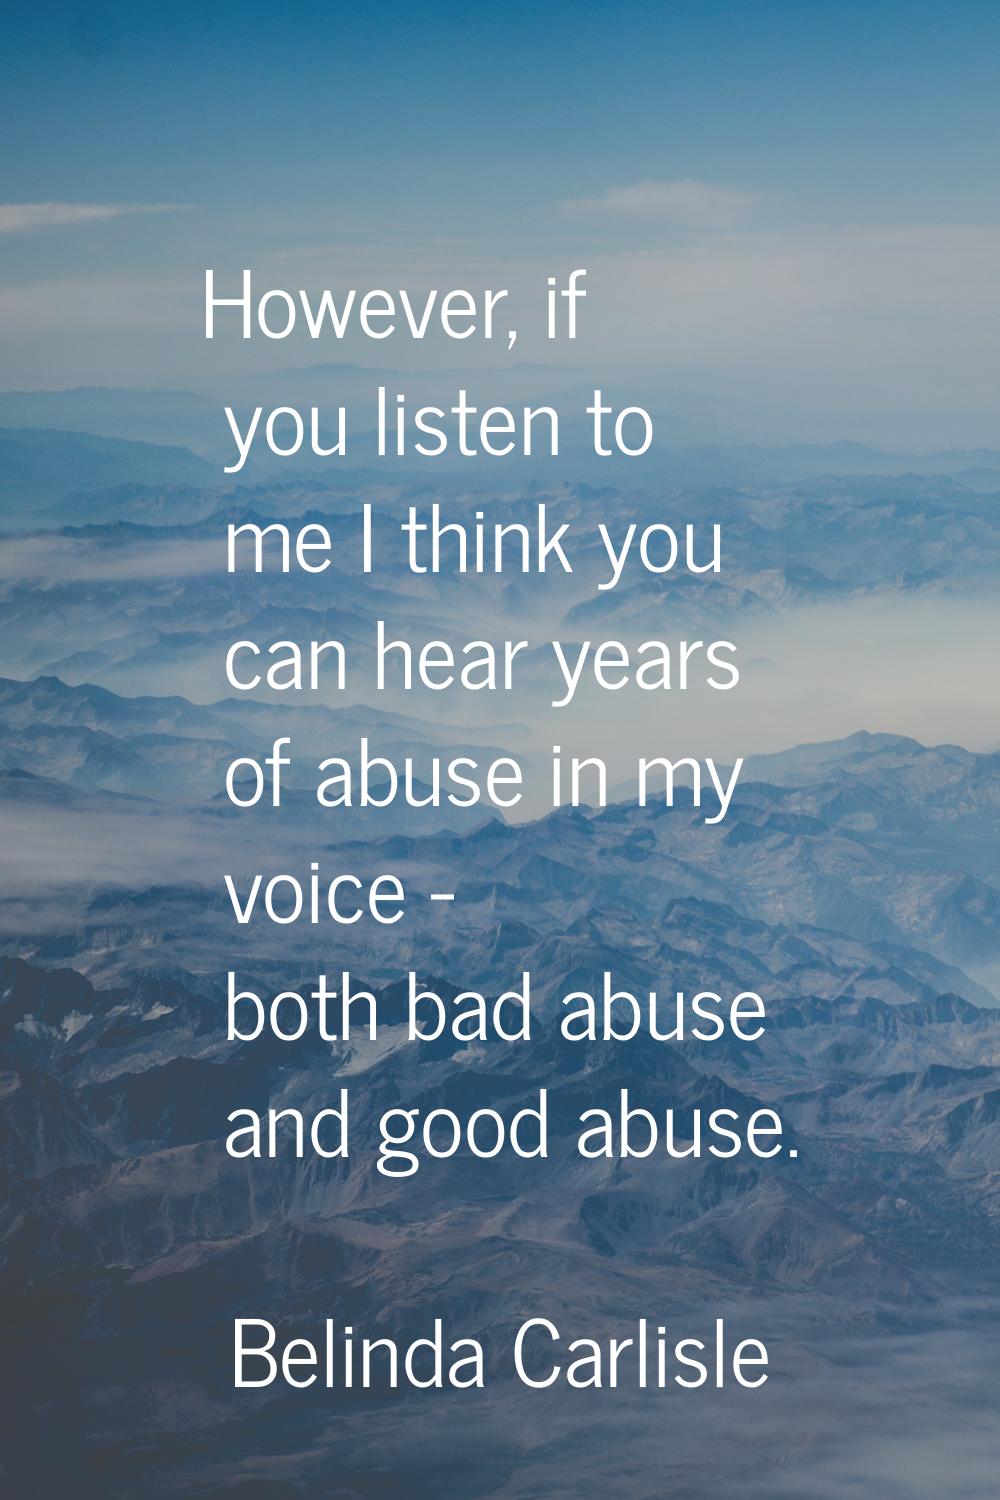 However, if you listen to me I think you can hear years of abuse in my voice - both bad abuse and g